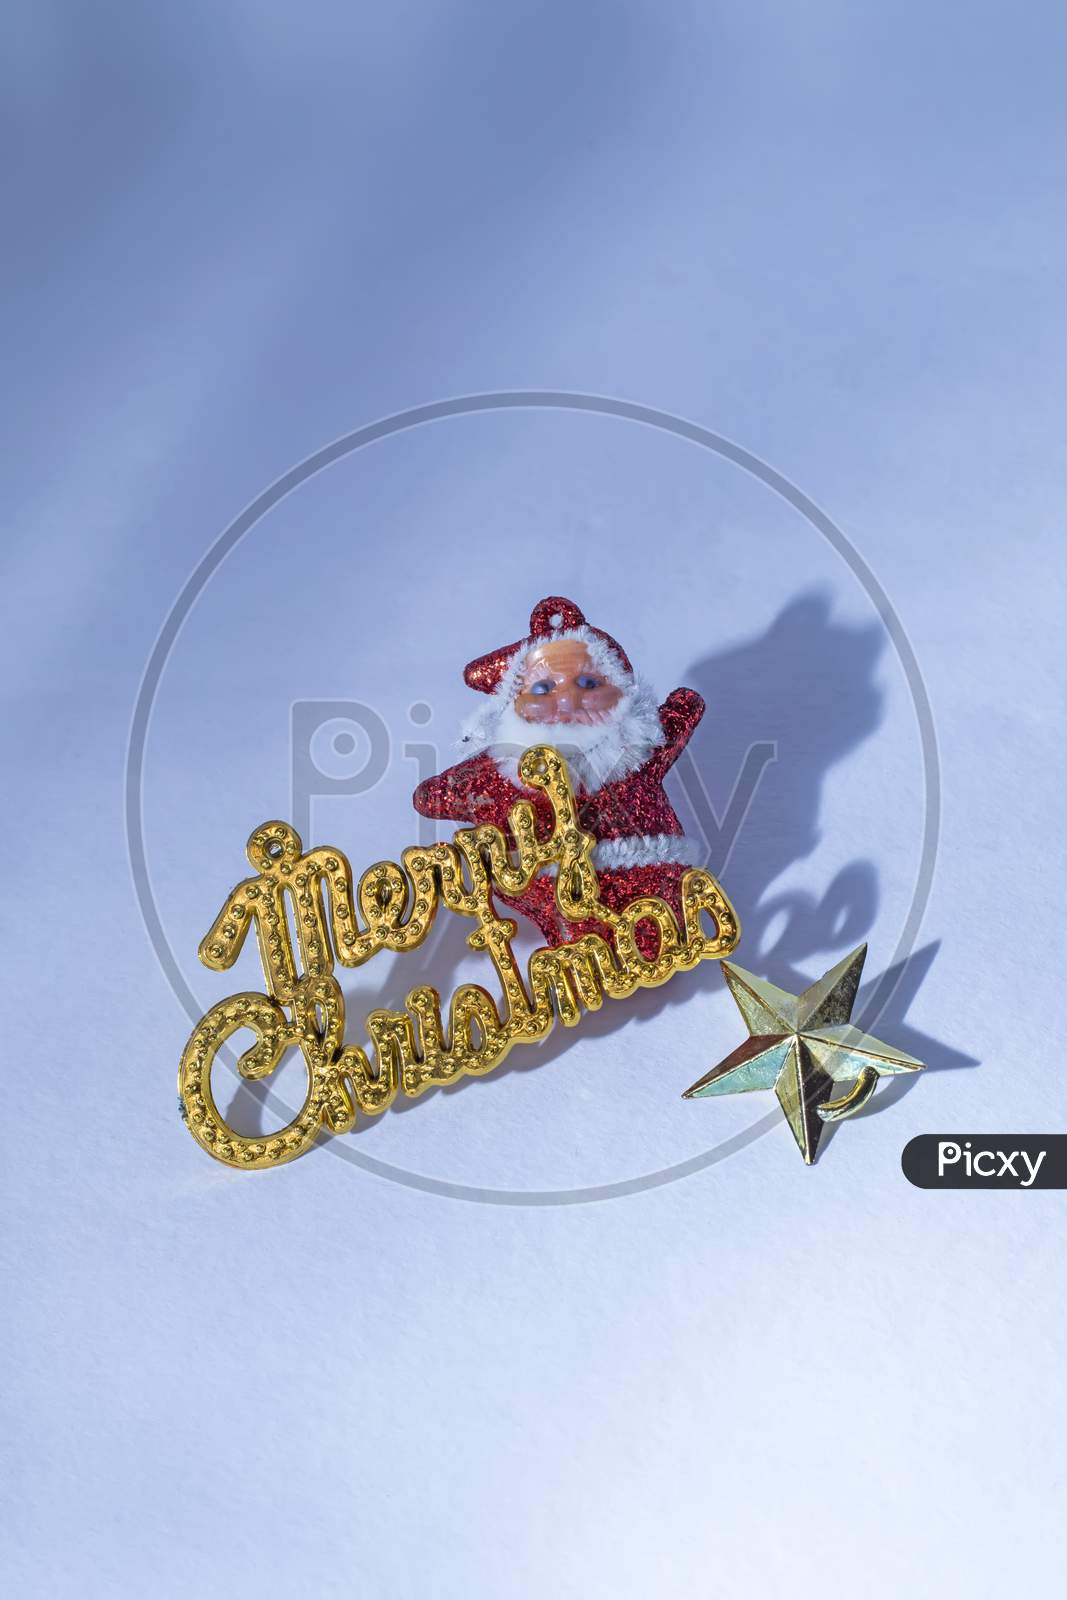 Merry Christmas Gold Text With Santa Claus Isolated On White Background